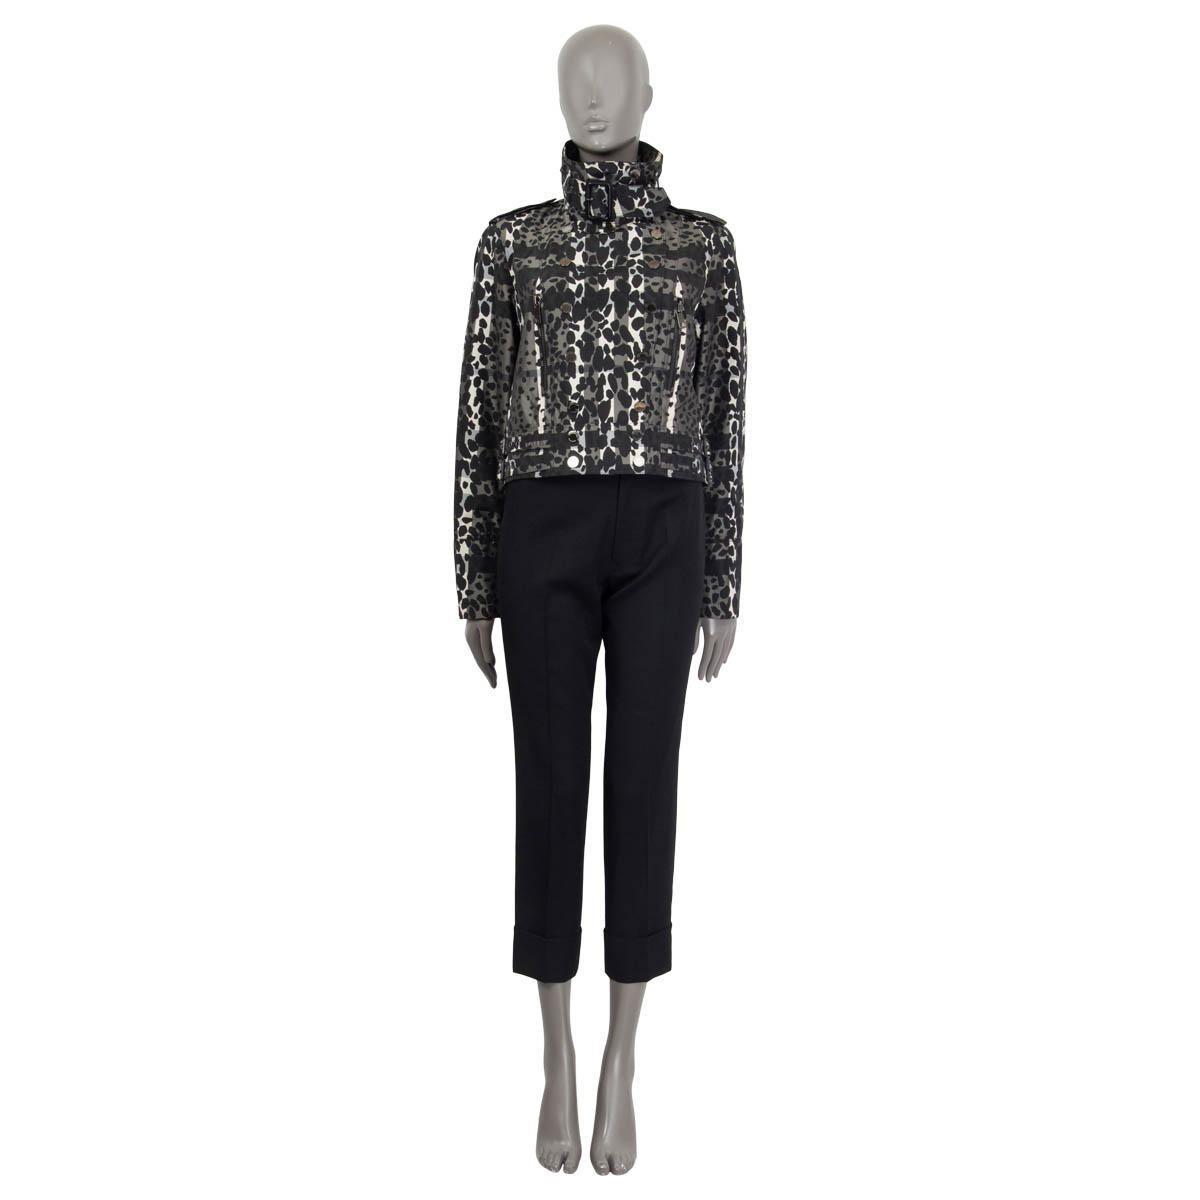 100% authentic Burberry Prorsum cheetah print cropped jacket in black, charcoal, gray and off white polyamide (assumed cause tag is missing). Features a detachable belt at the neck, zipped cuffs and epaulettes at the shoulders. Has two zip pockets